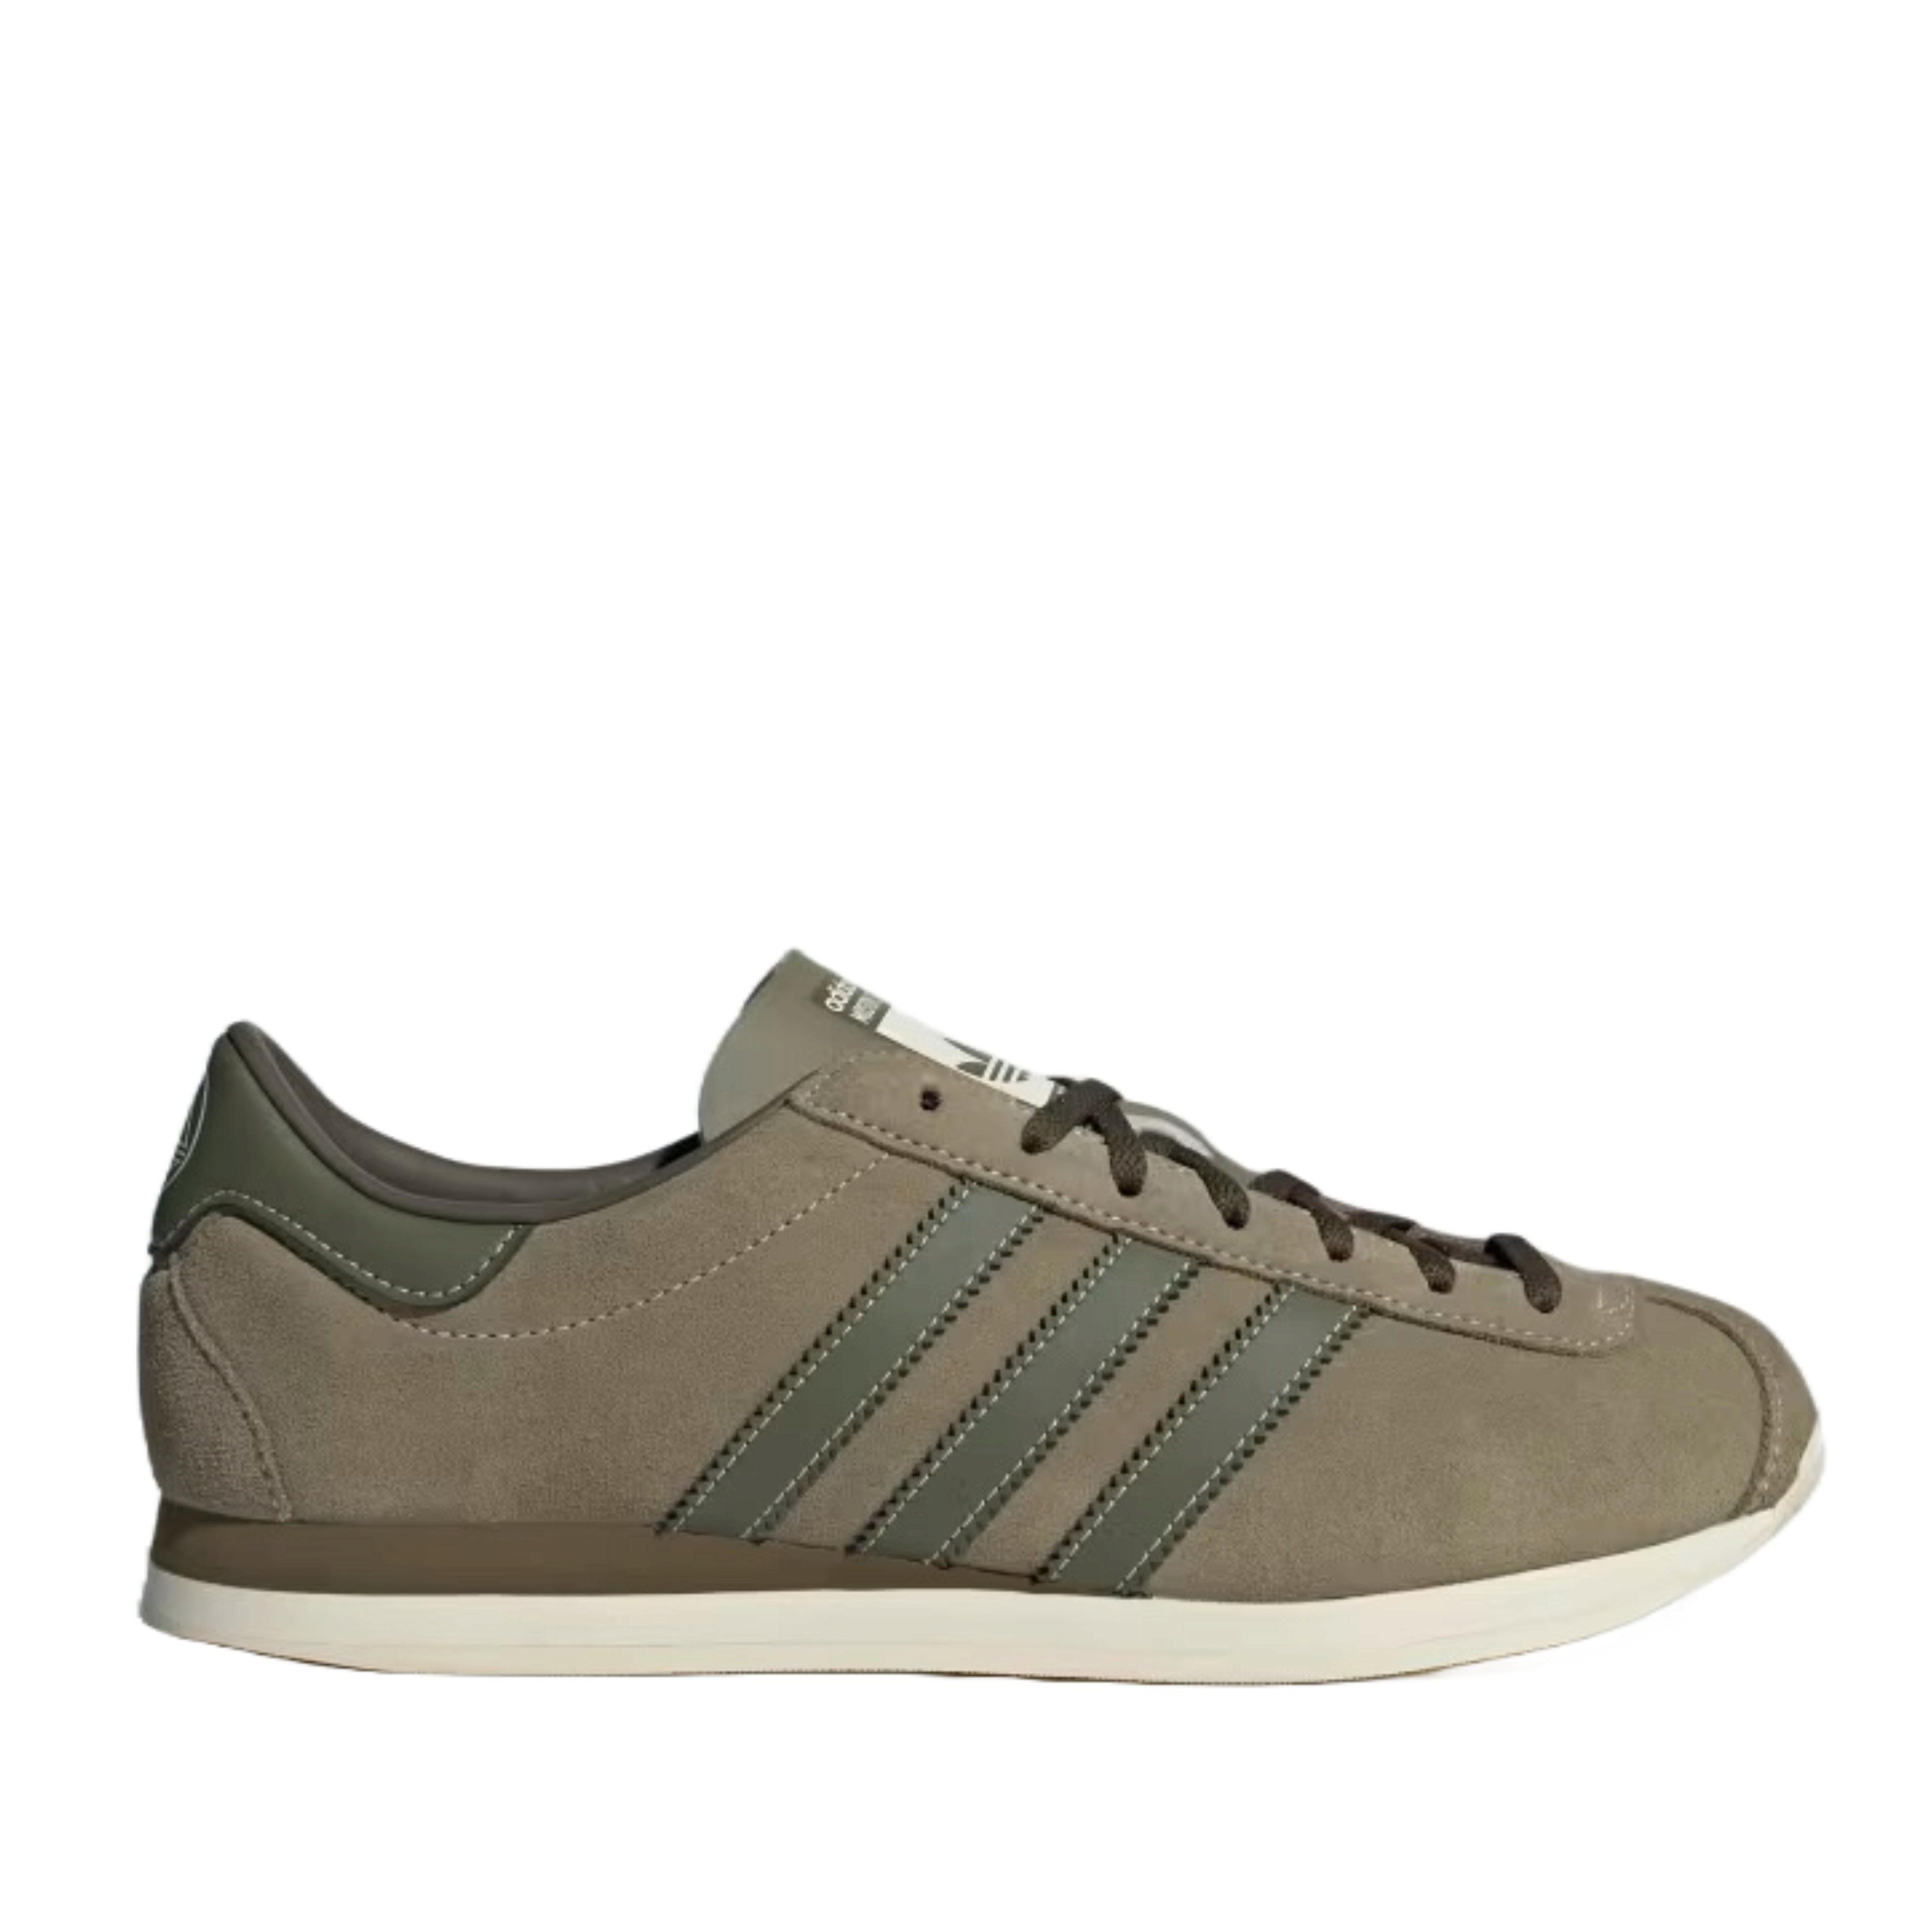 Adidas - Moston Super SPZL - (Cargo / Focus Olive / Trace Olive) by ADIDAS